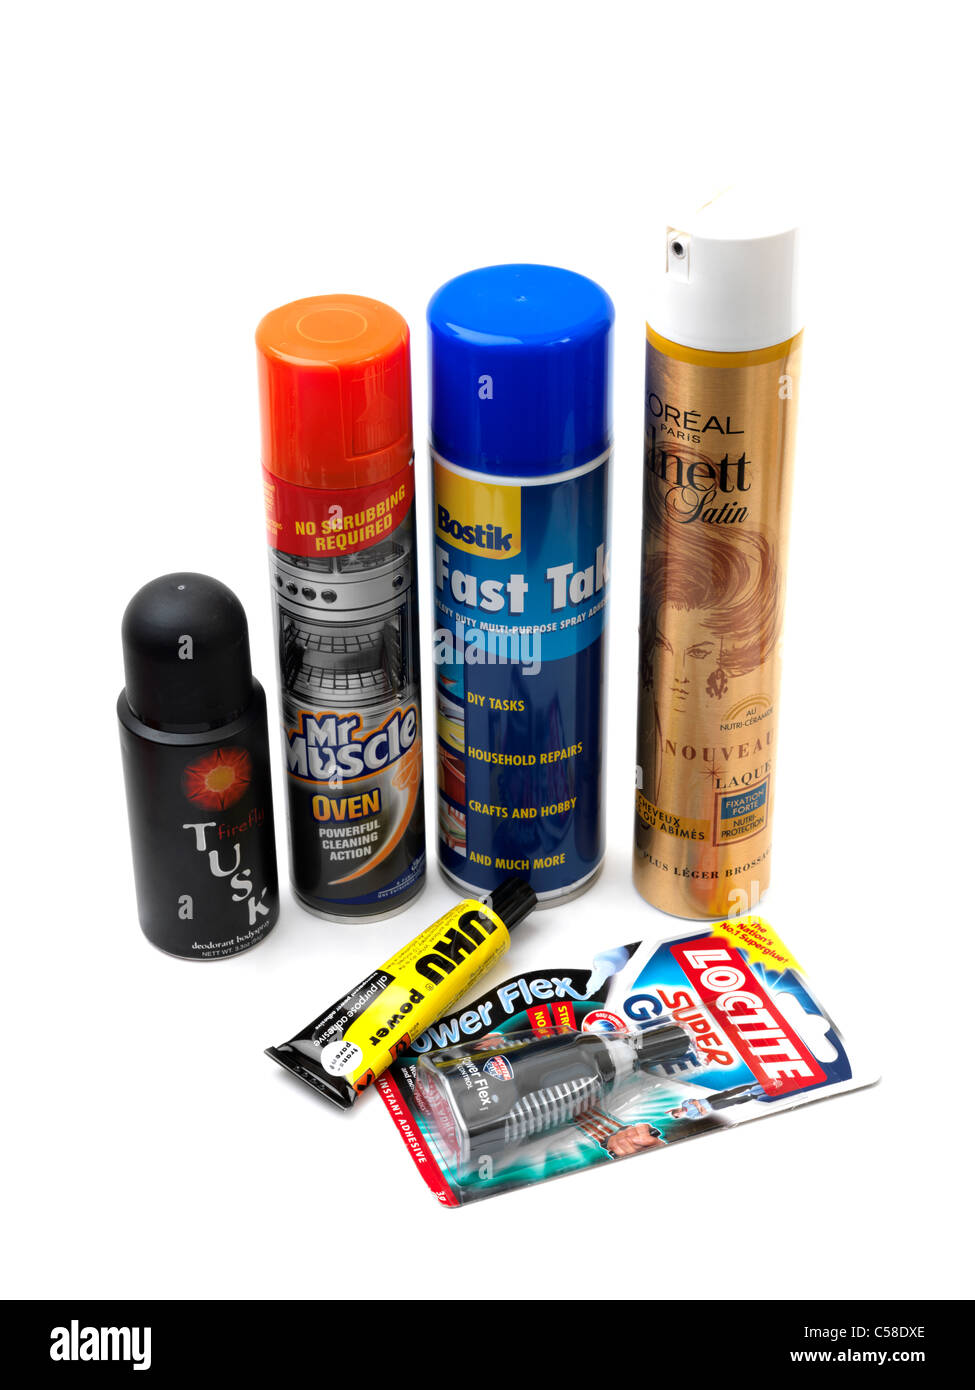 https://c8.alamy.com/comp/C58DXE/various-household-products-that-are-sometimes-used-as-inhalants-C58DXE.jpg